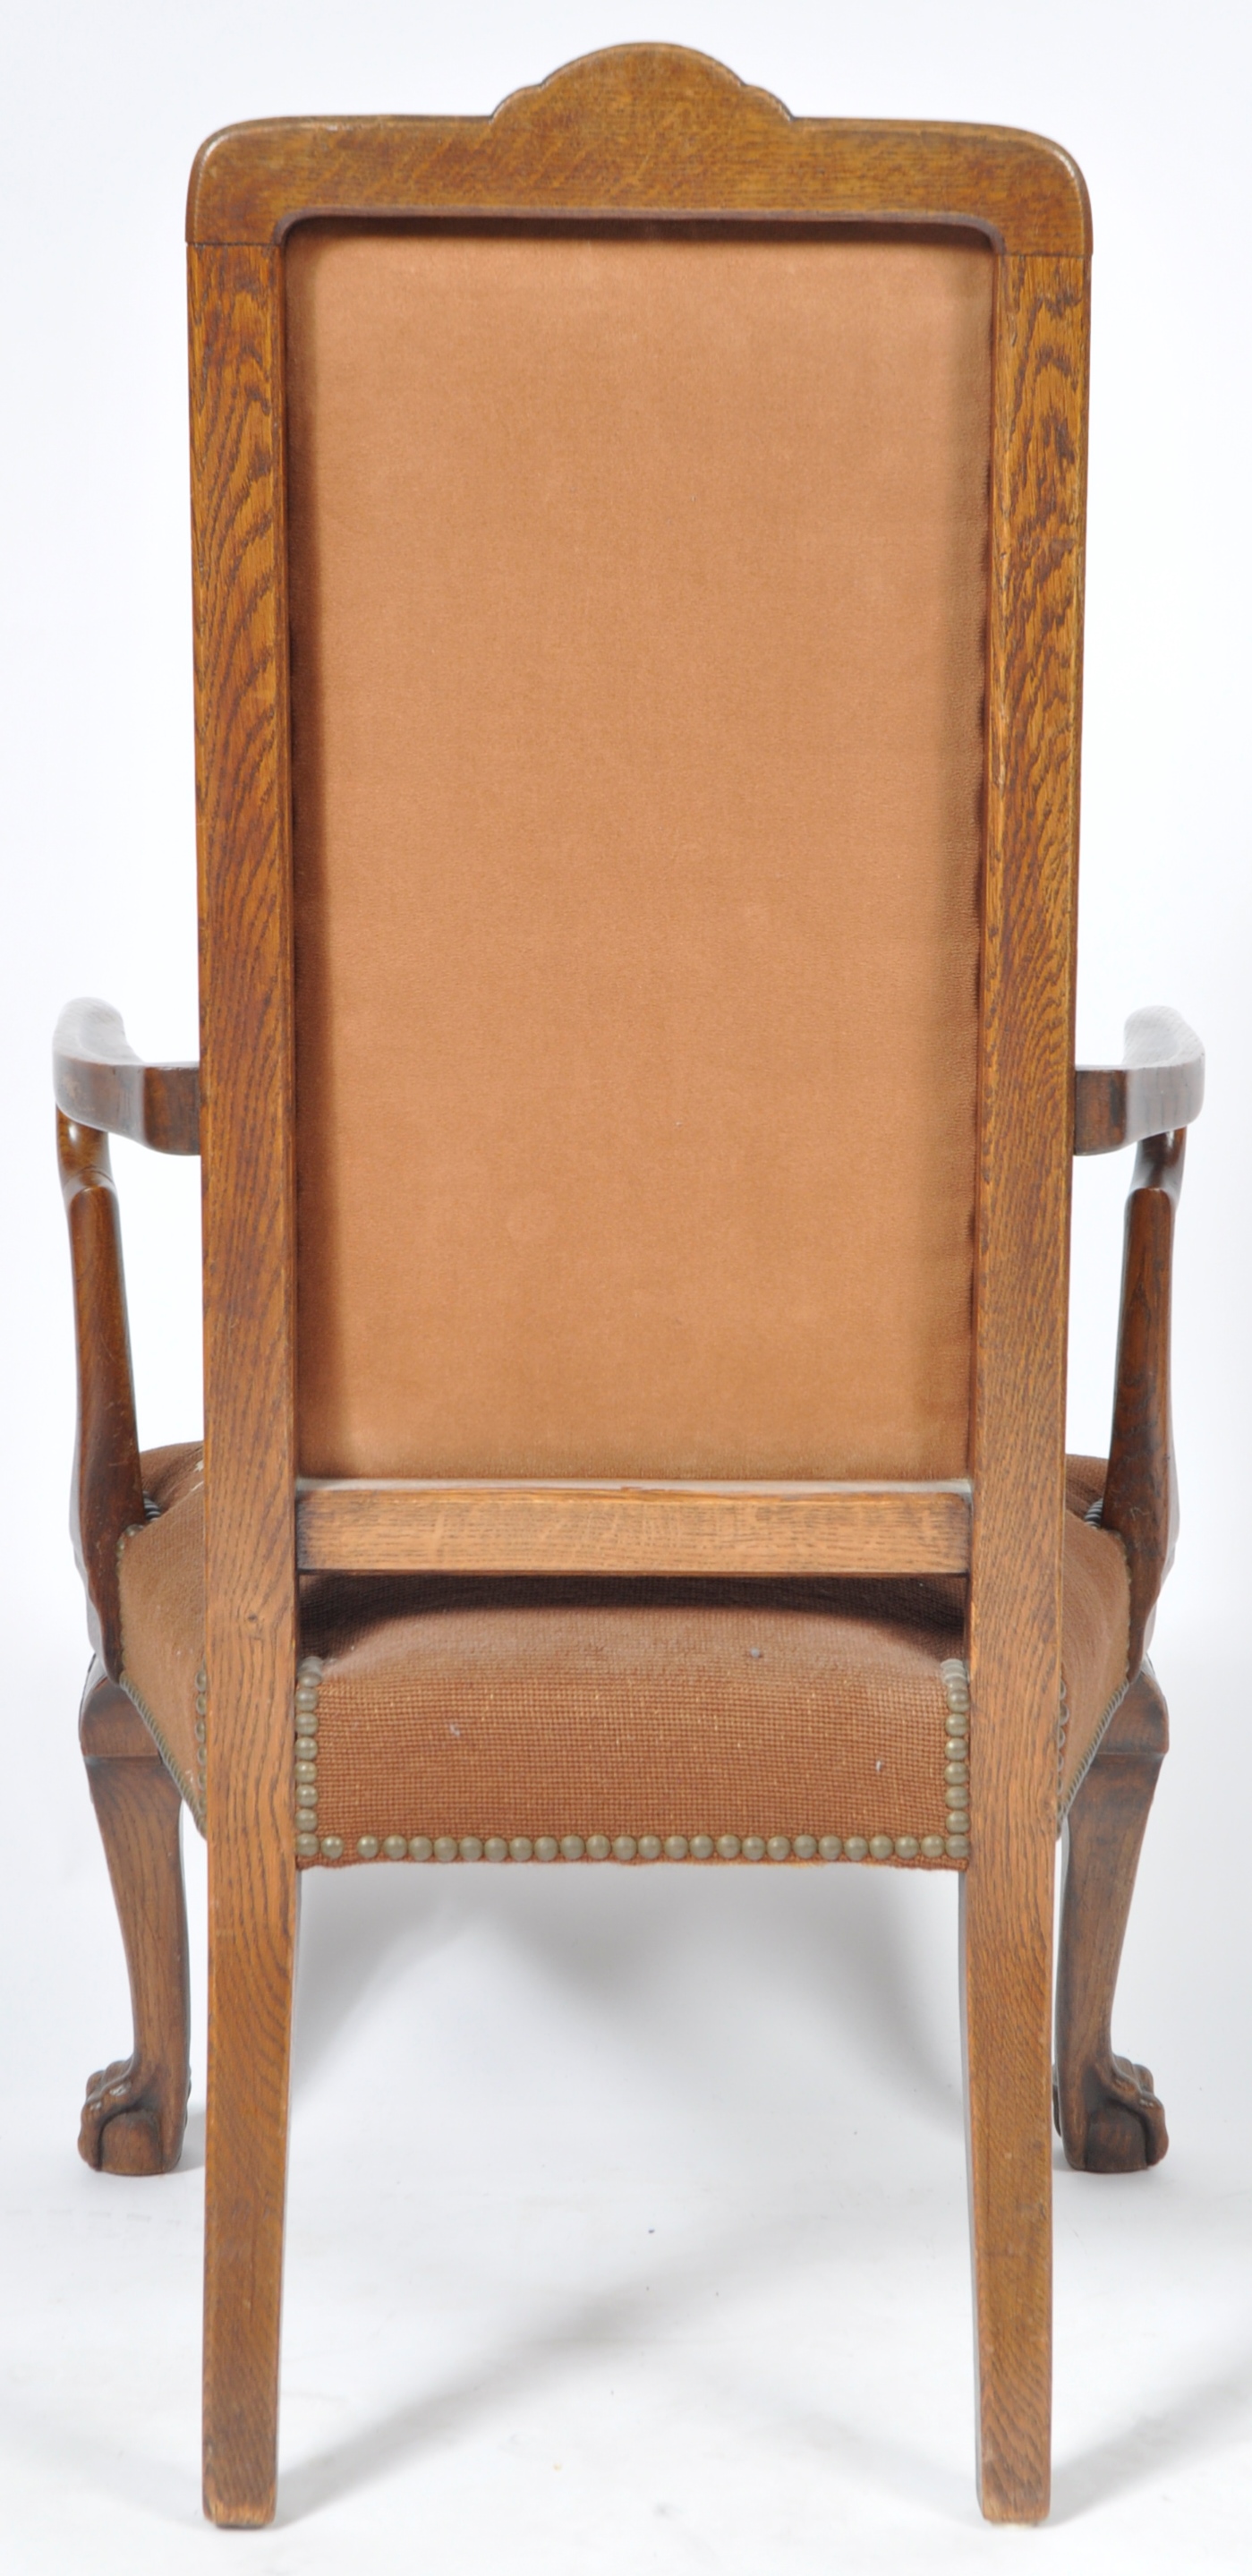 19TH CENTURY QUEEN ANNE REVIVAL OAK TAPESTRY ARMCHAIR - Image 7 of 8